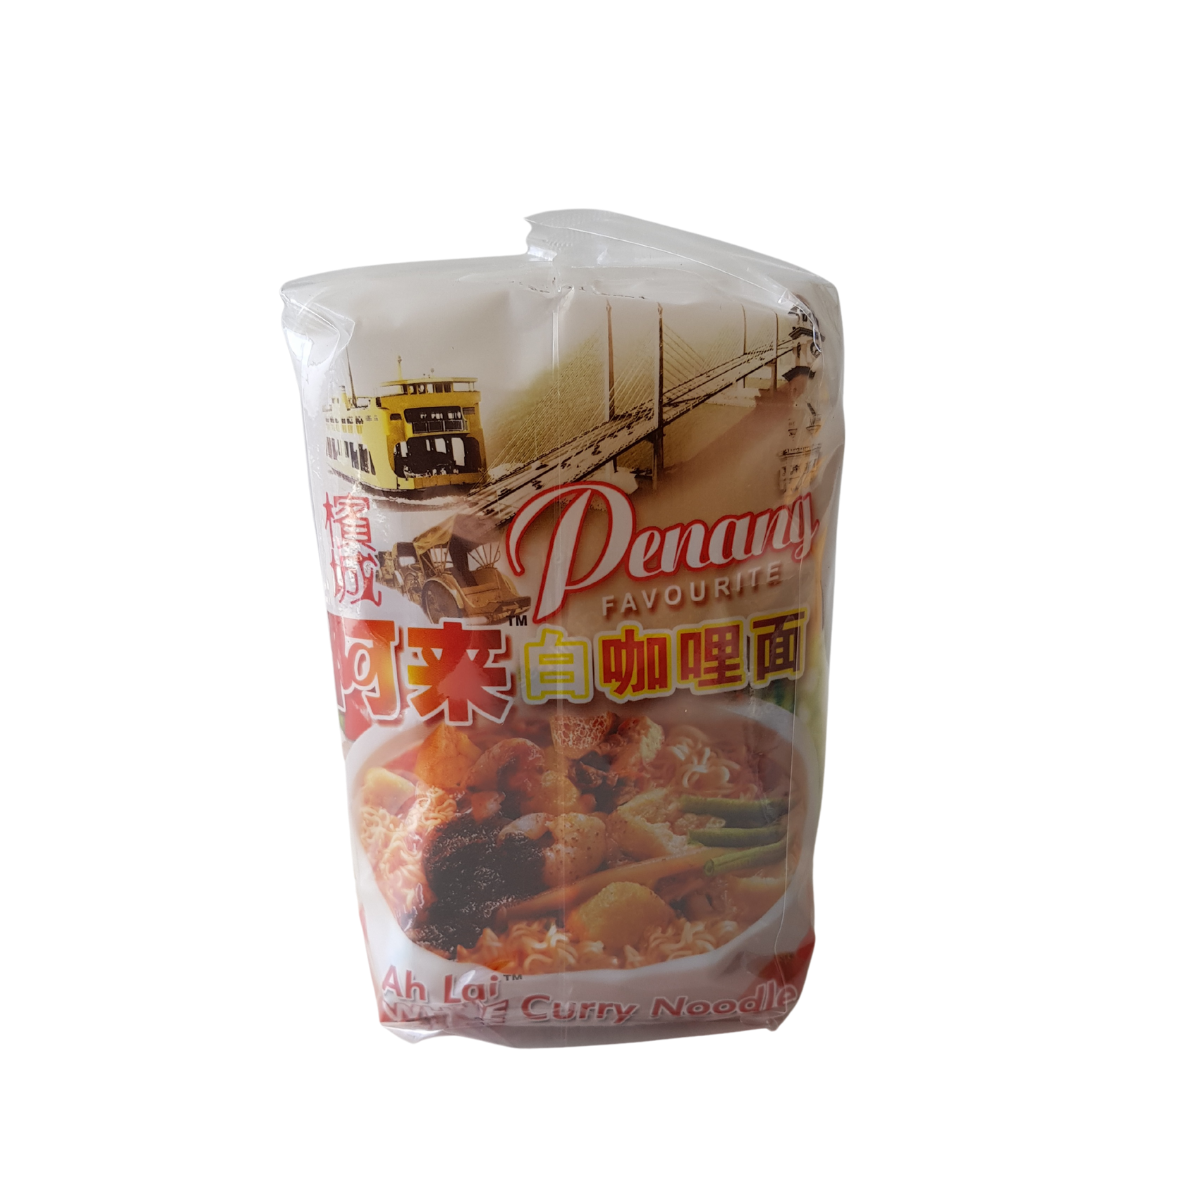 Ah Lai Penang White Curry Noodles 4x110g Pack